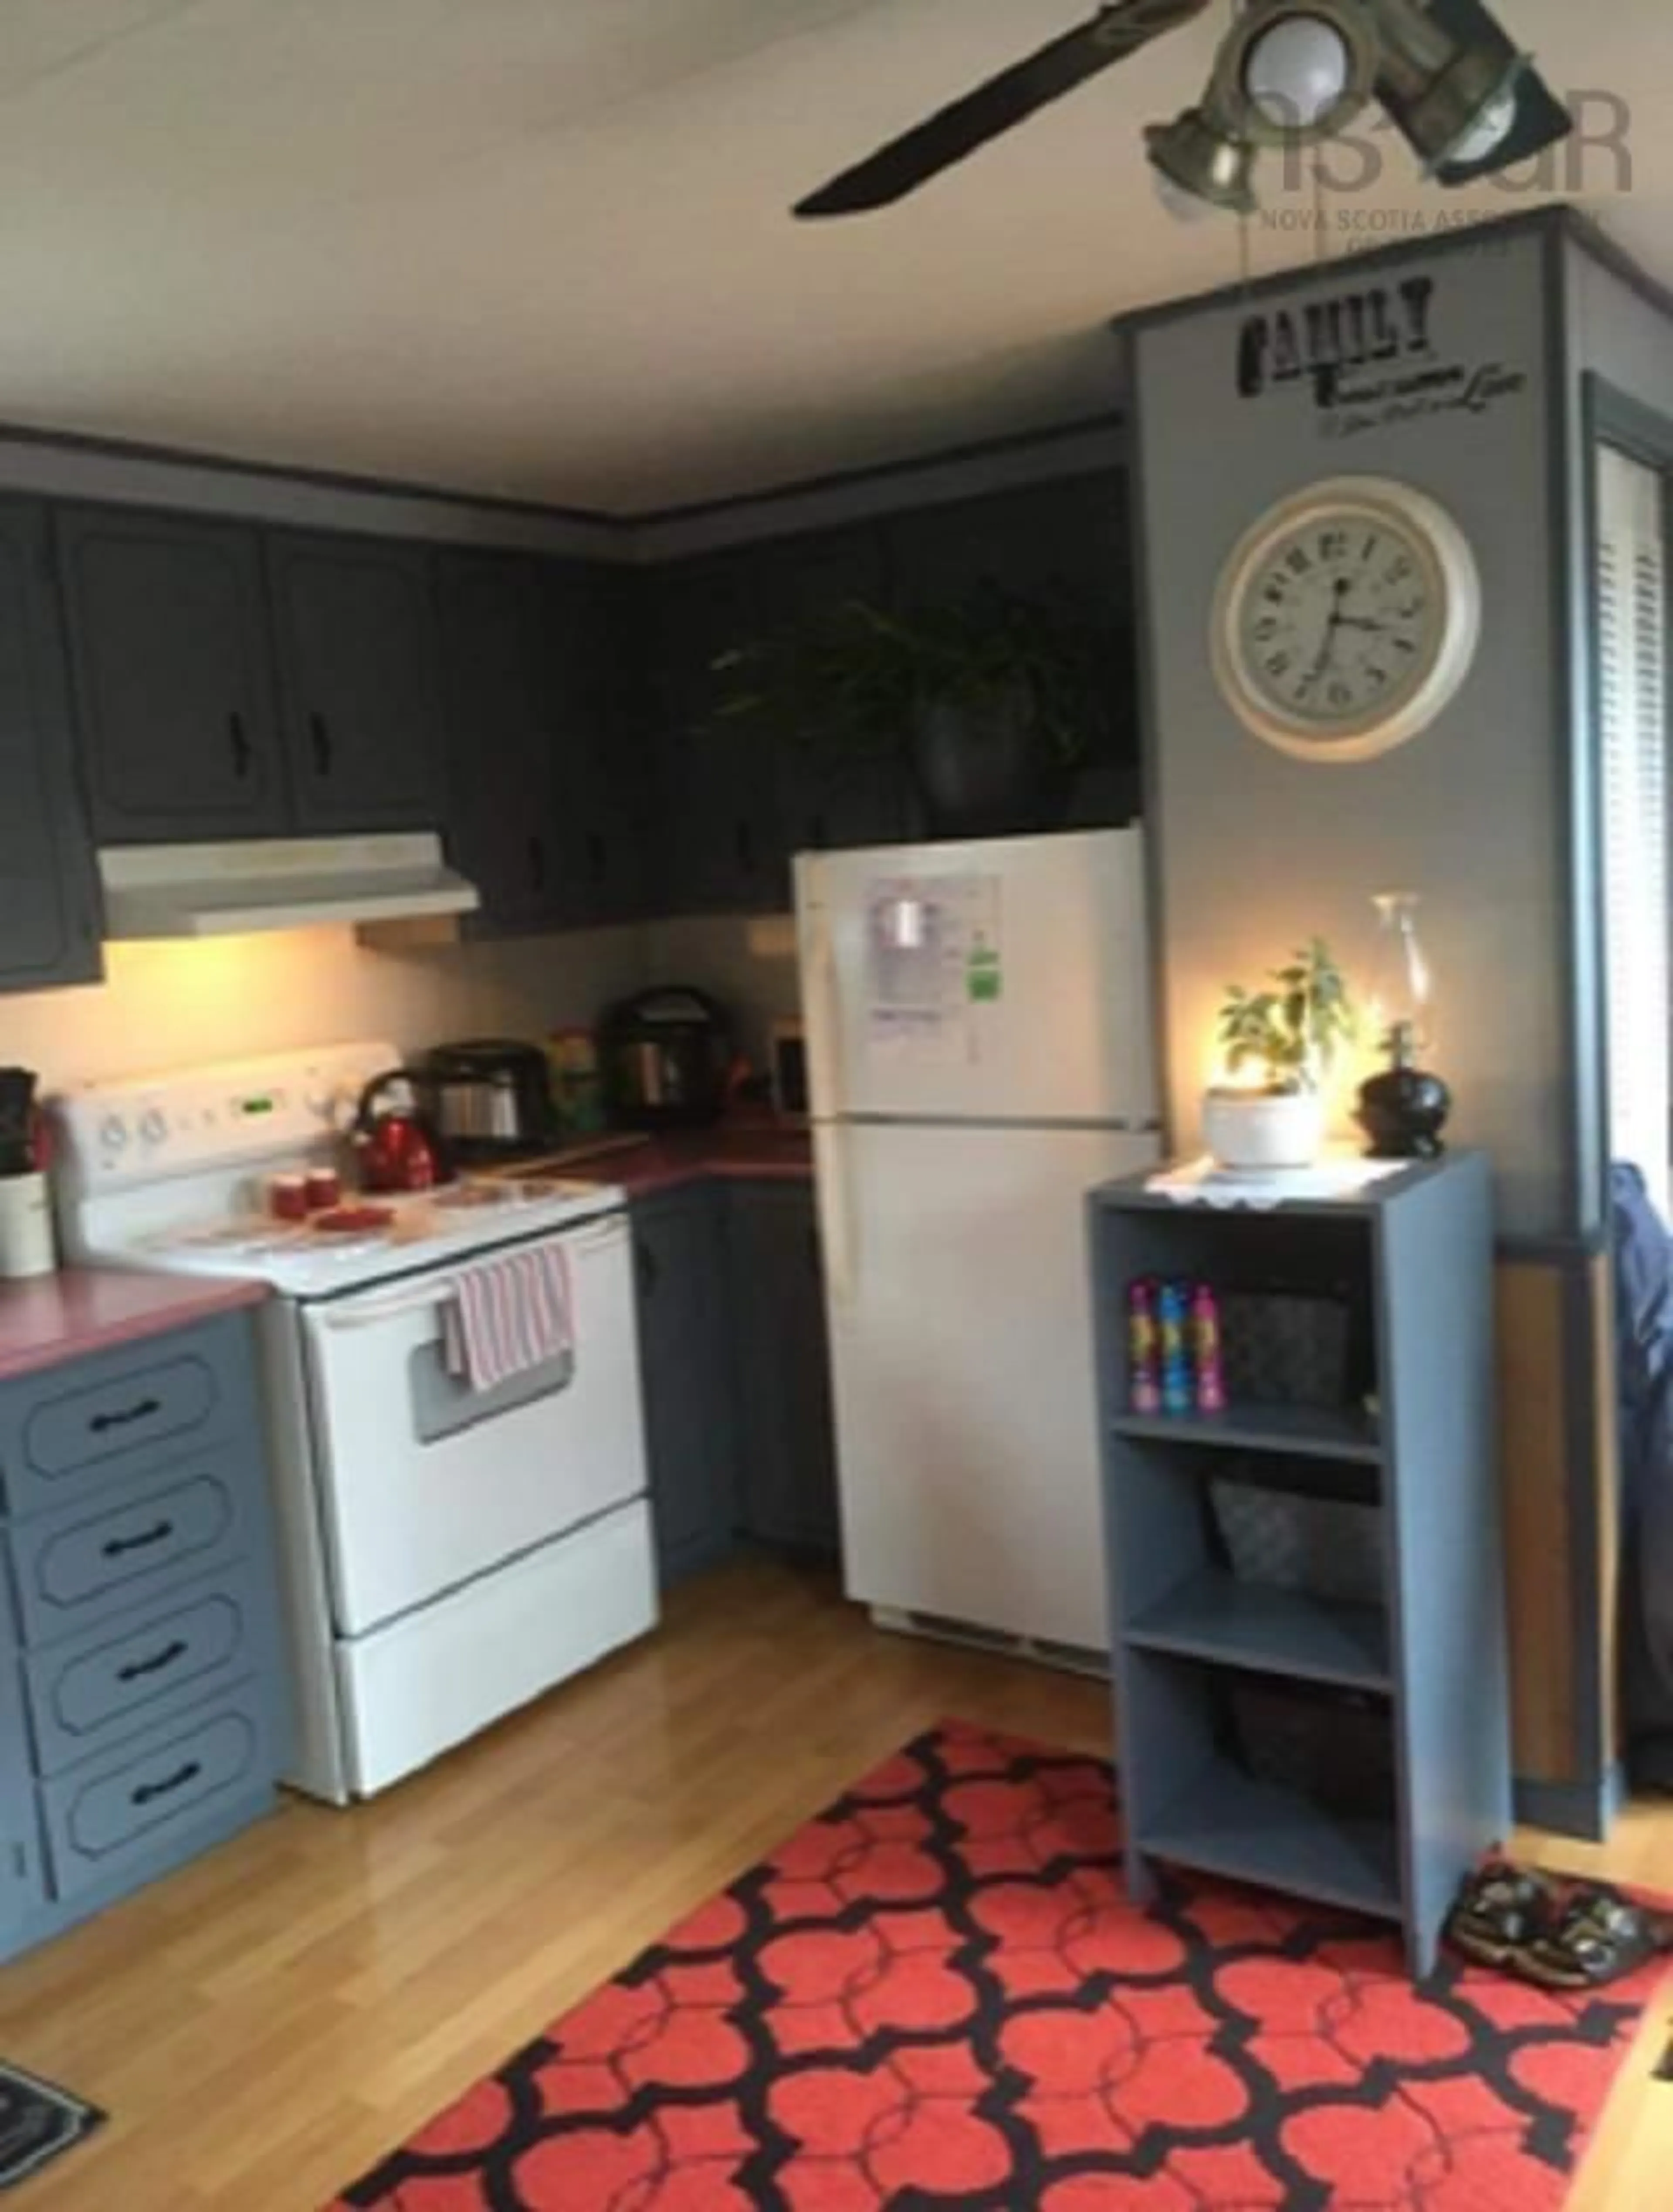 Kitchen for 45 Rocky Rd, Canso Nova Scotia B0H 1H0